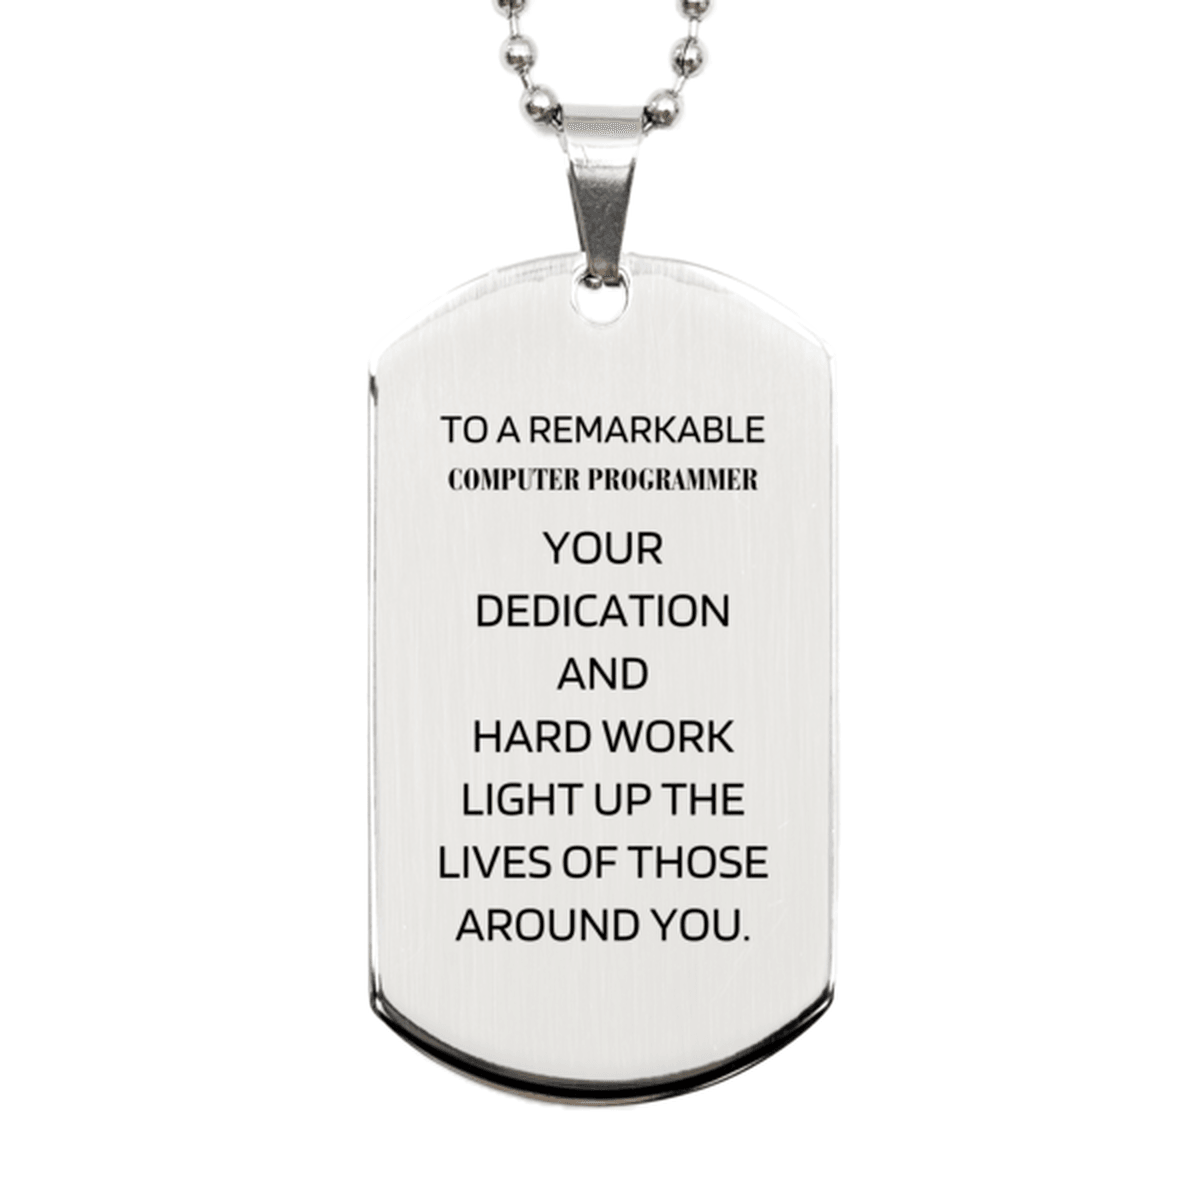 Remarkable Computer Programmer Gifts, Your dedication and hard work, Inspirational Birthday Christmas Unique Silver Dog Tag For Computer Programmer, Coworkers, Men, Women, Friends - Mallard Moon Gift Shop